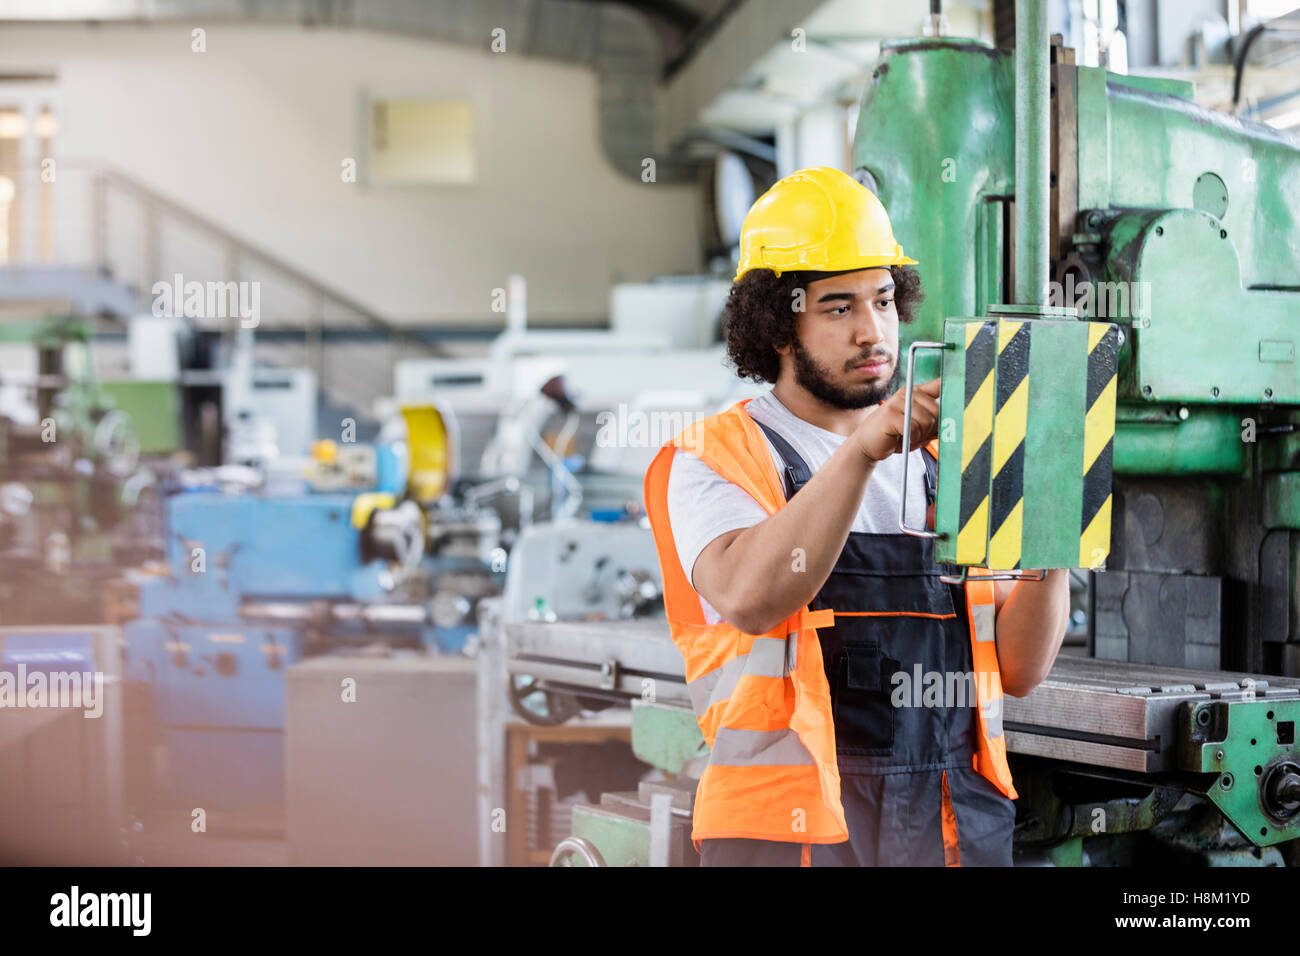 Young manual worker operating machinery in metal industry Stock Photo